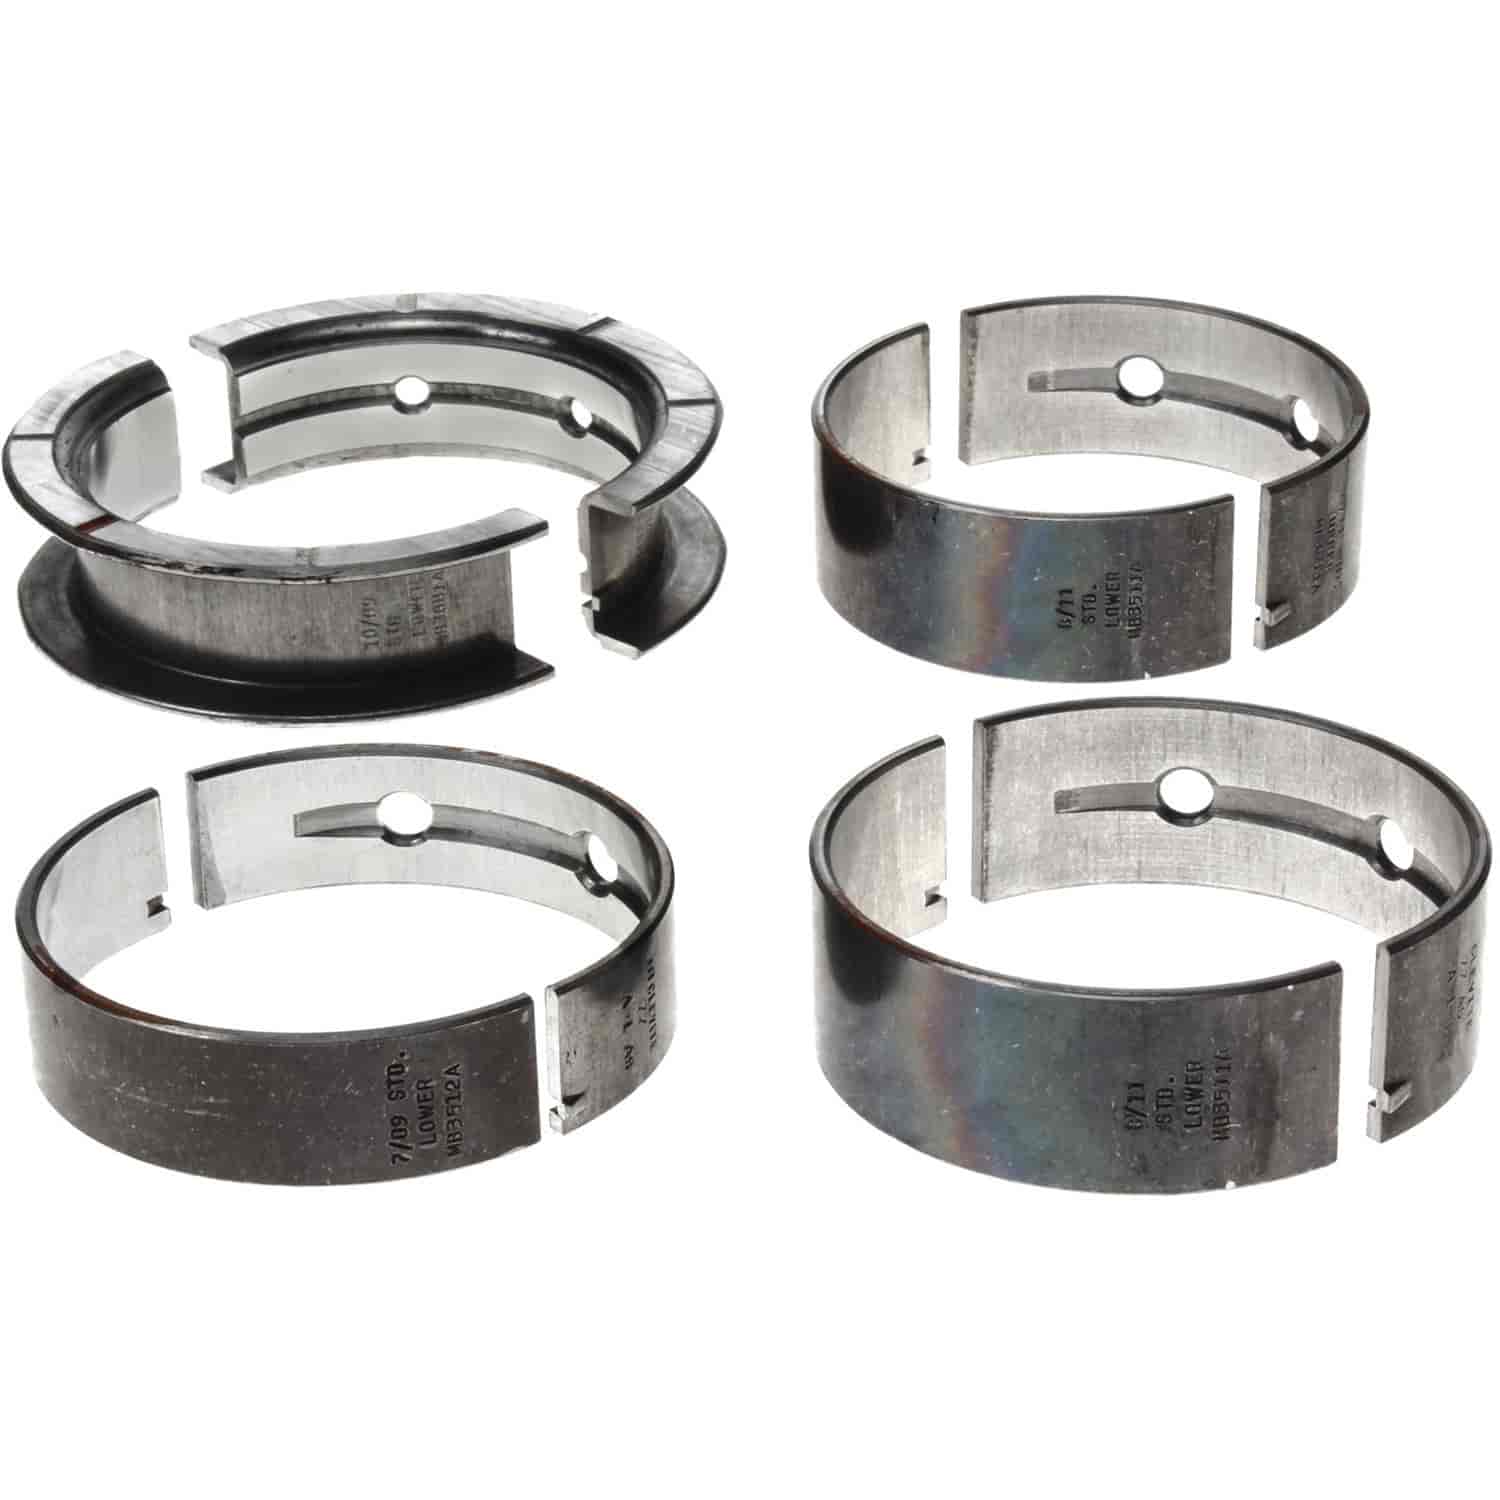 Main Bearing Set Chevy 1985-2009 V6 2.8/3.1/3.4L with -.75mm Undersize